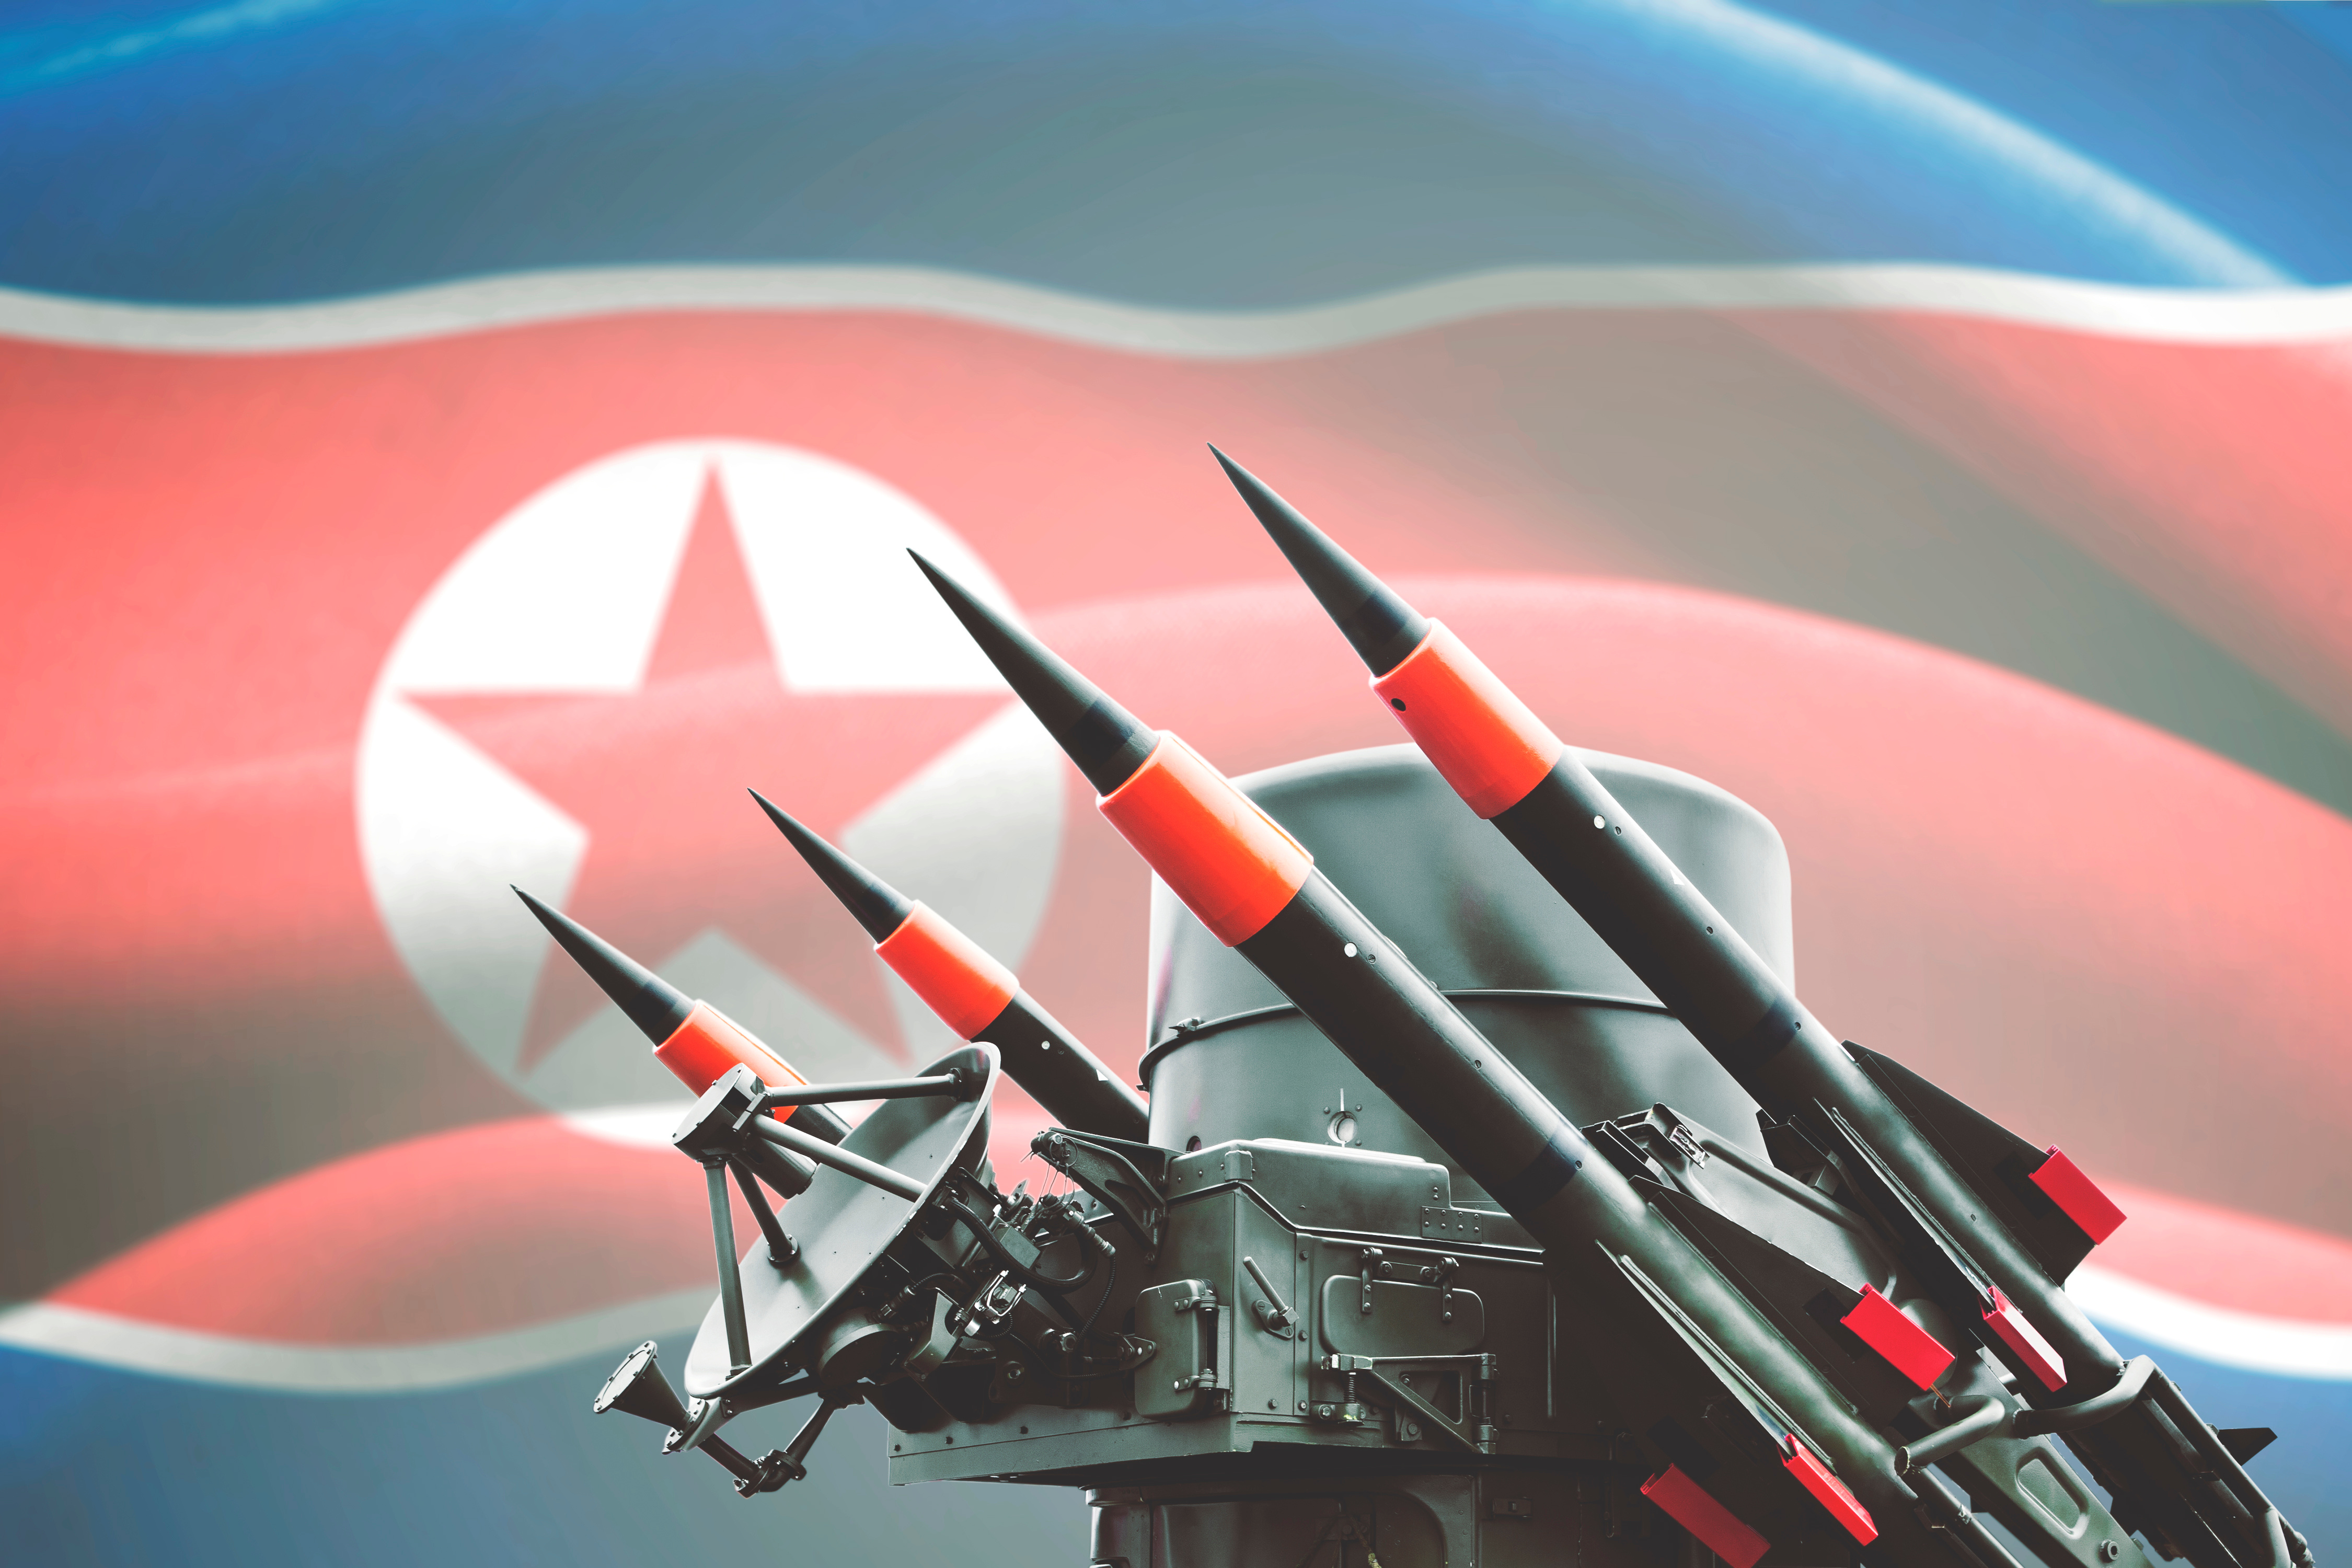 North Korea Funds Its Weapons Programs With Stolen Cryptocurrency